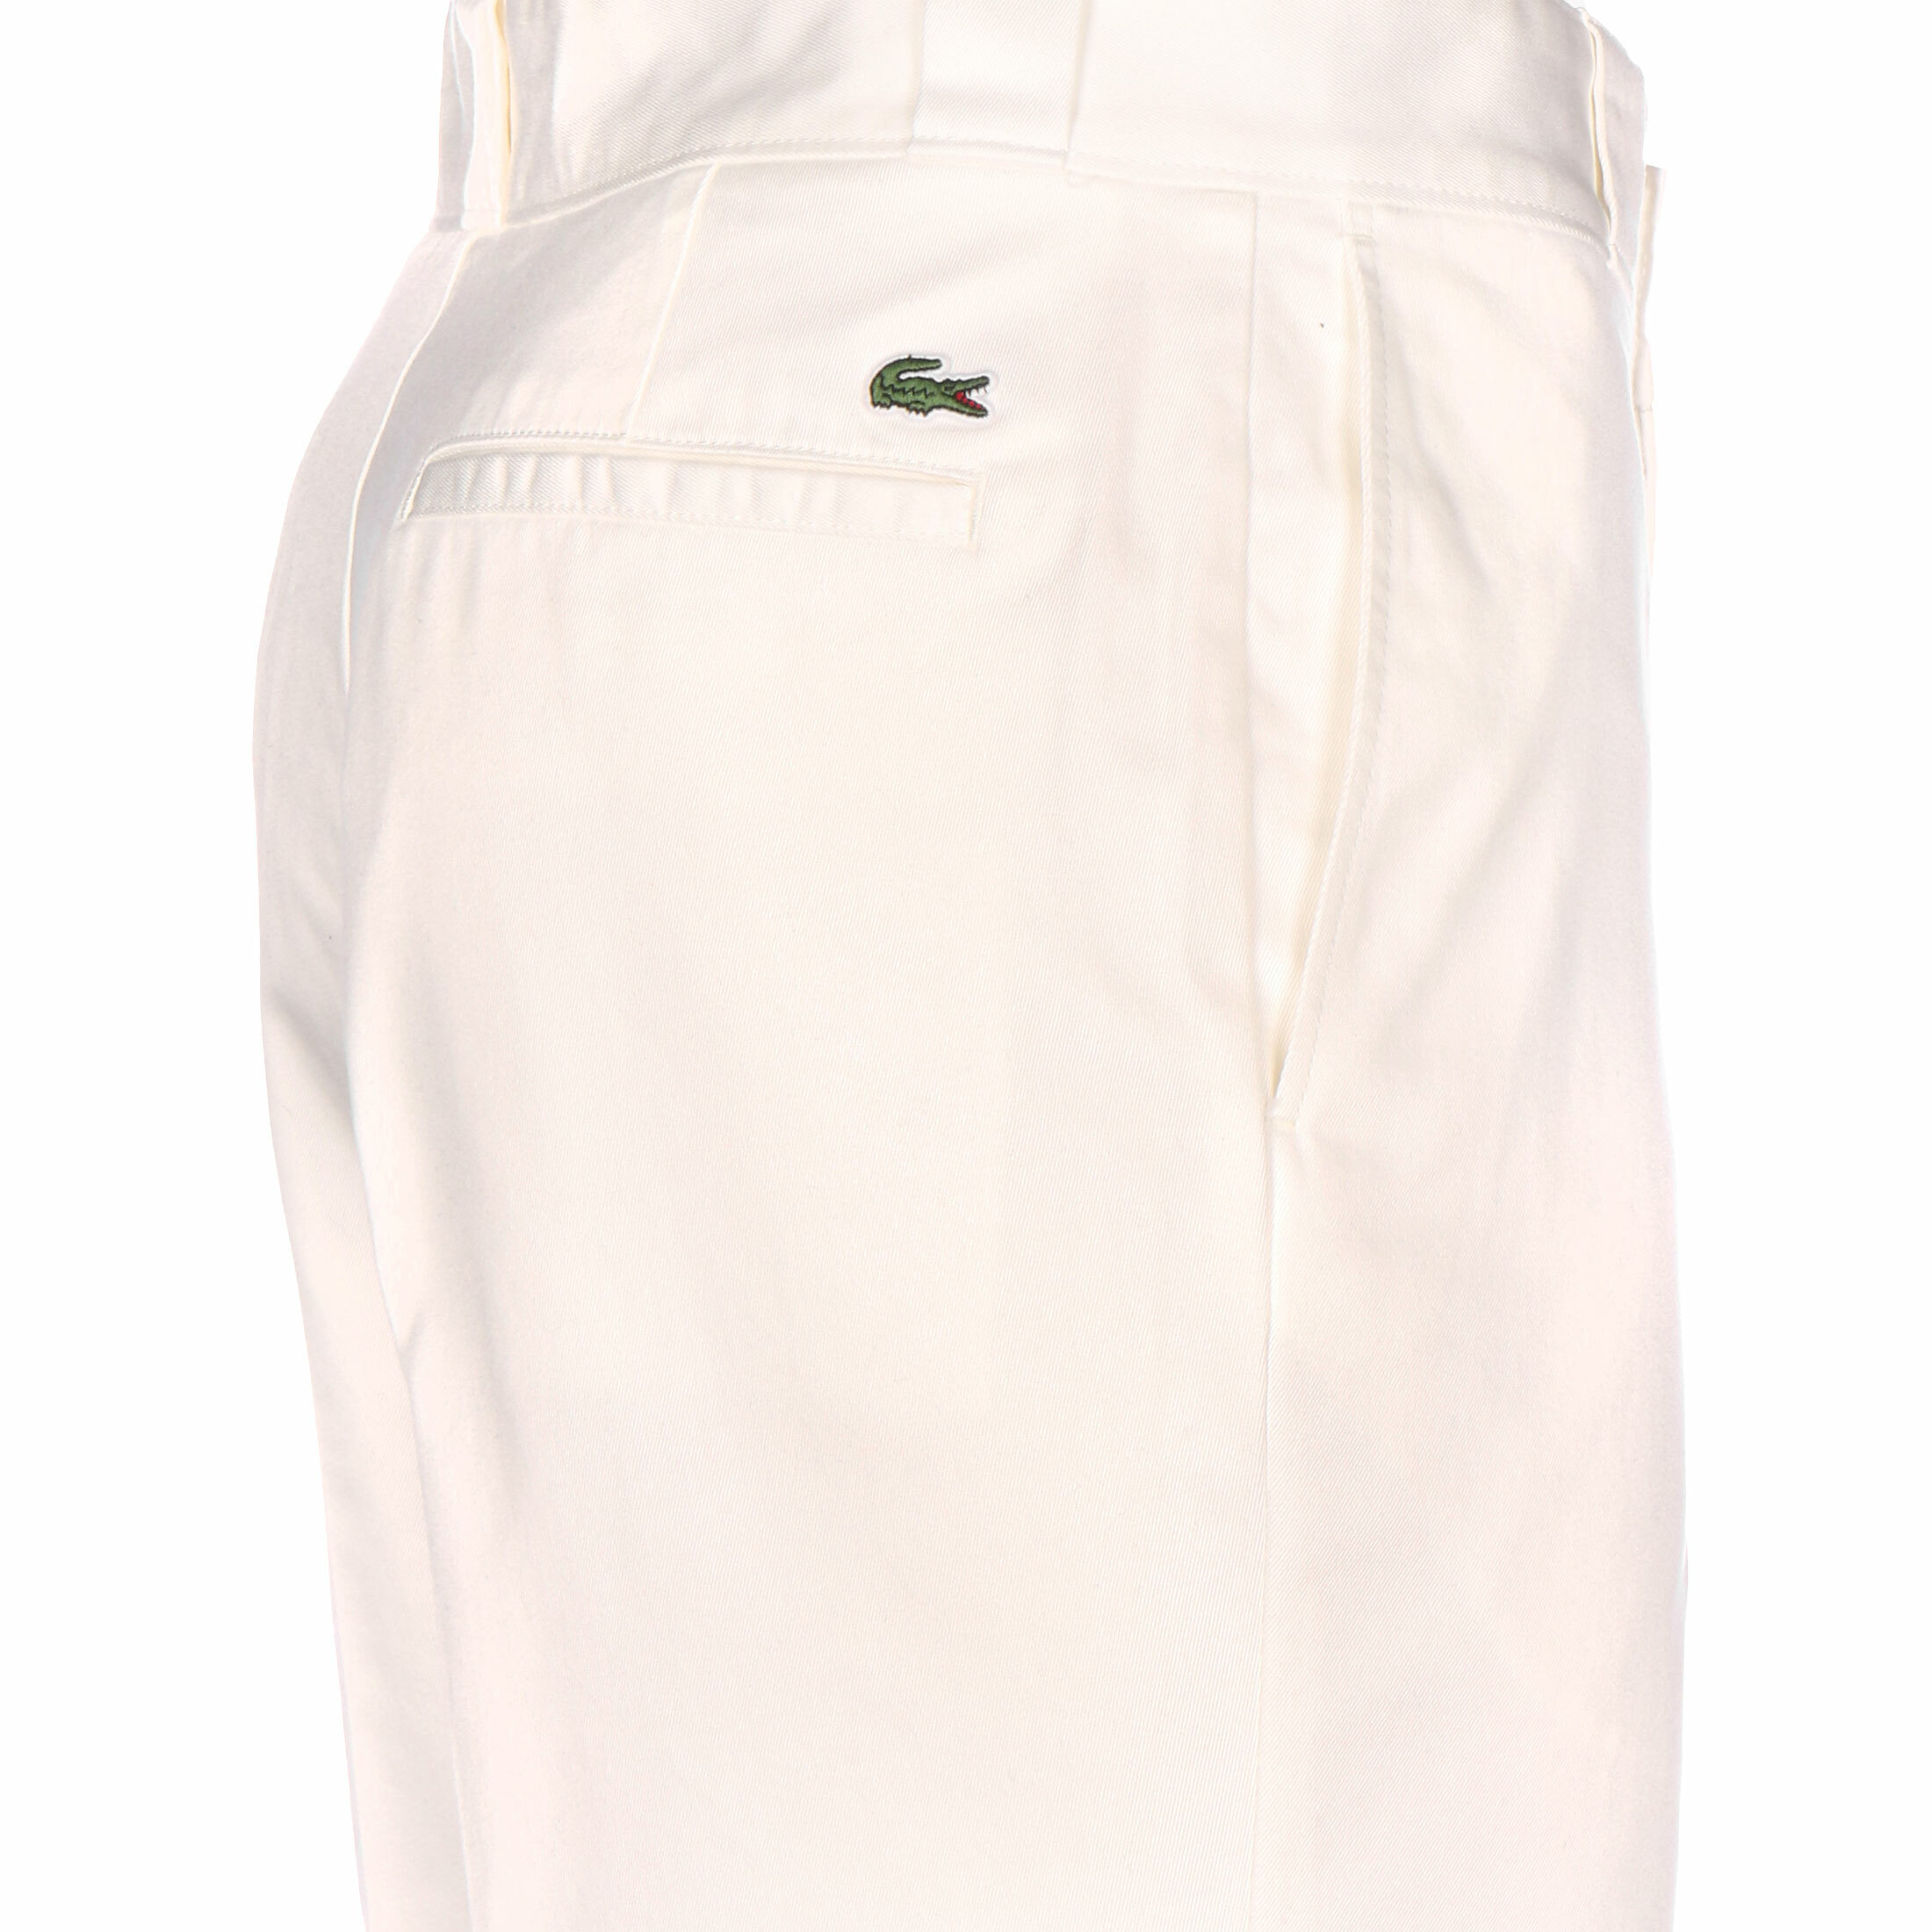 Lacoste LIVE Hose in Weiß 